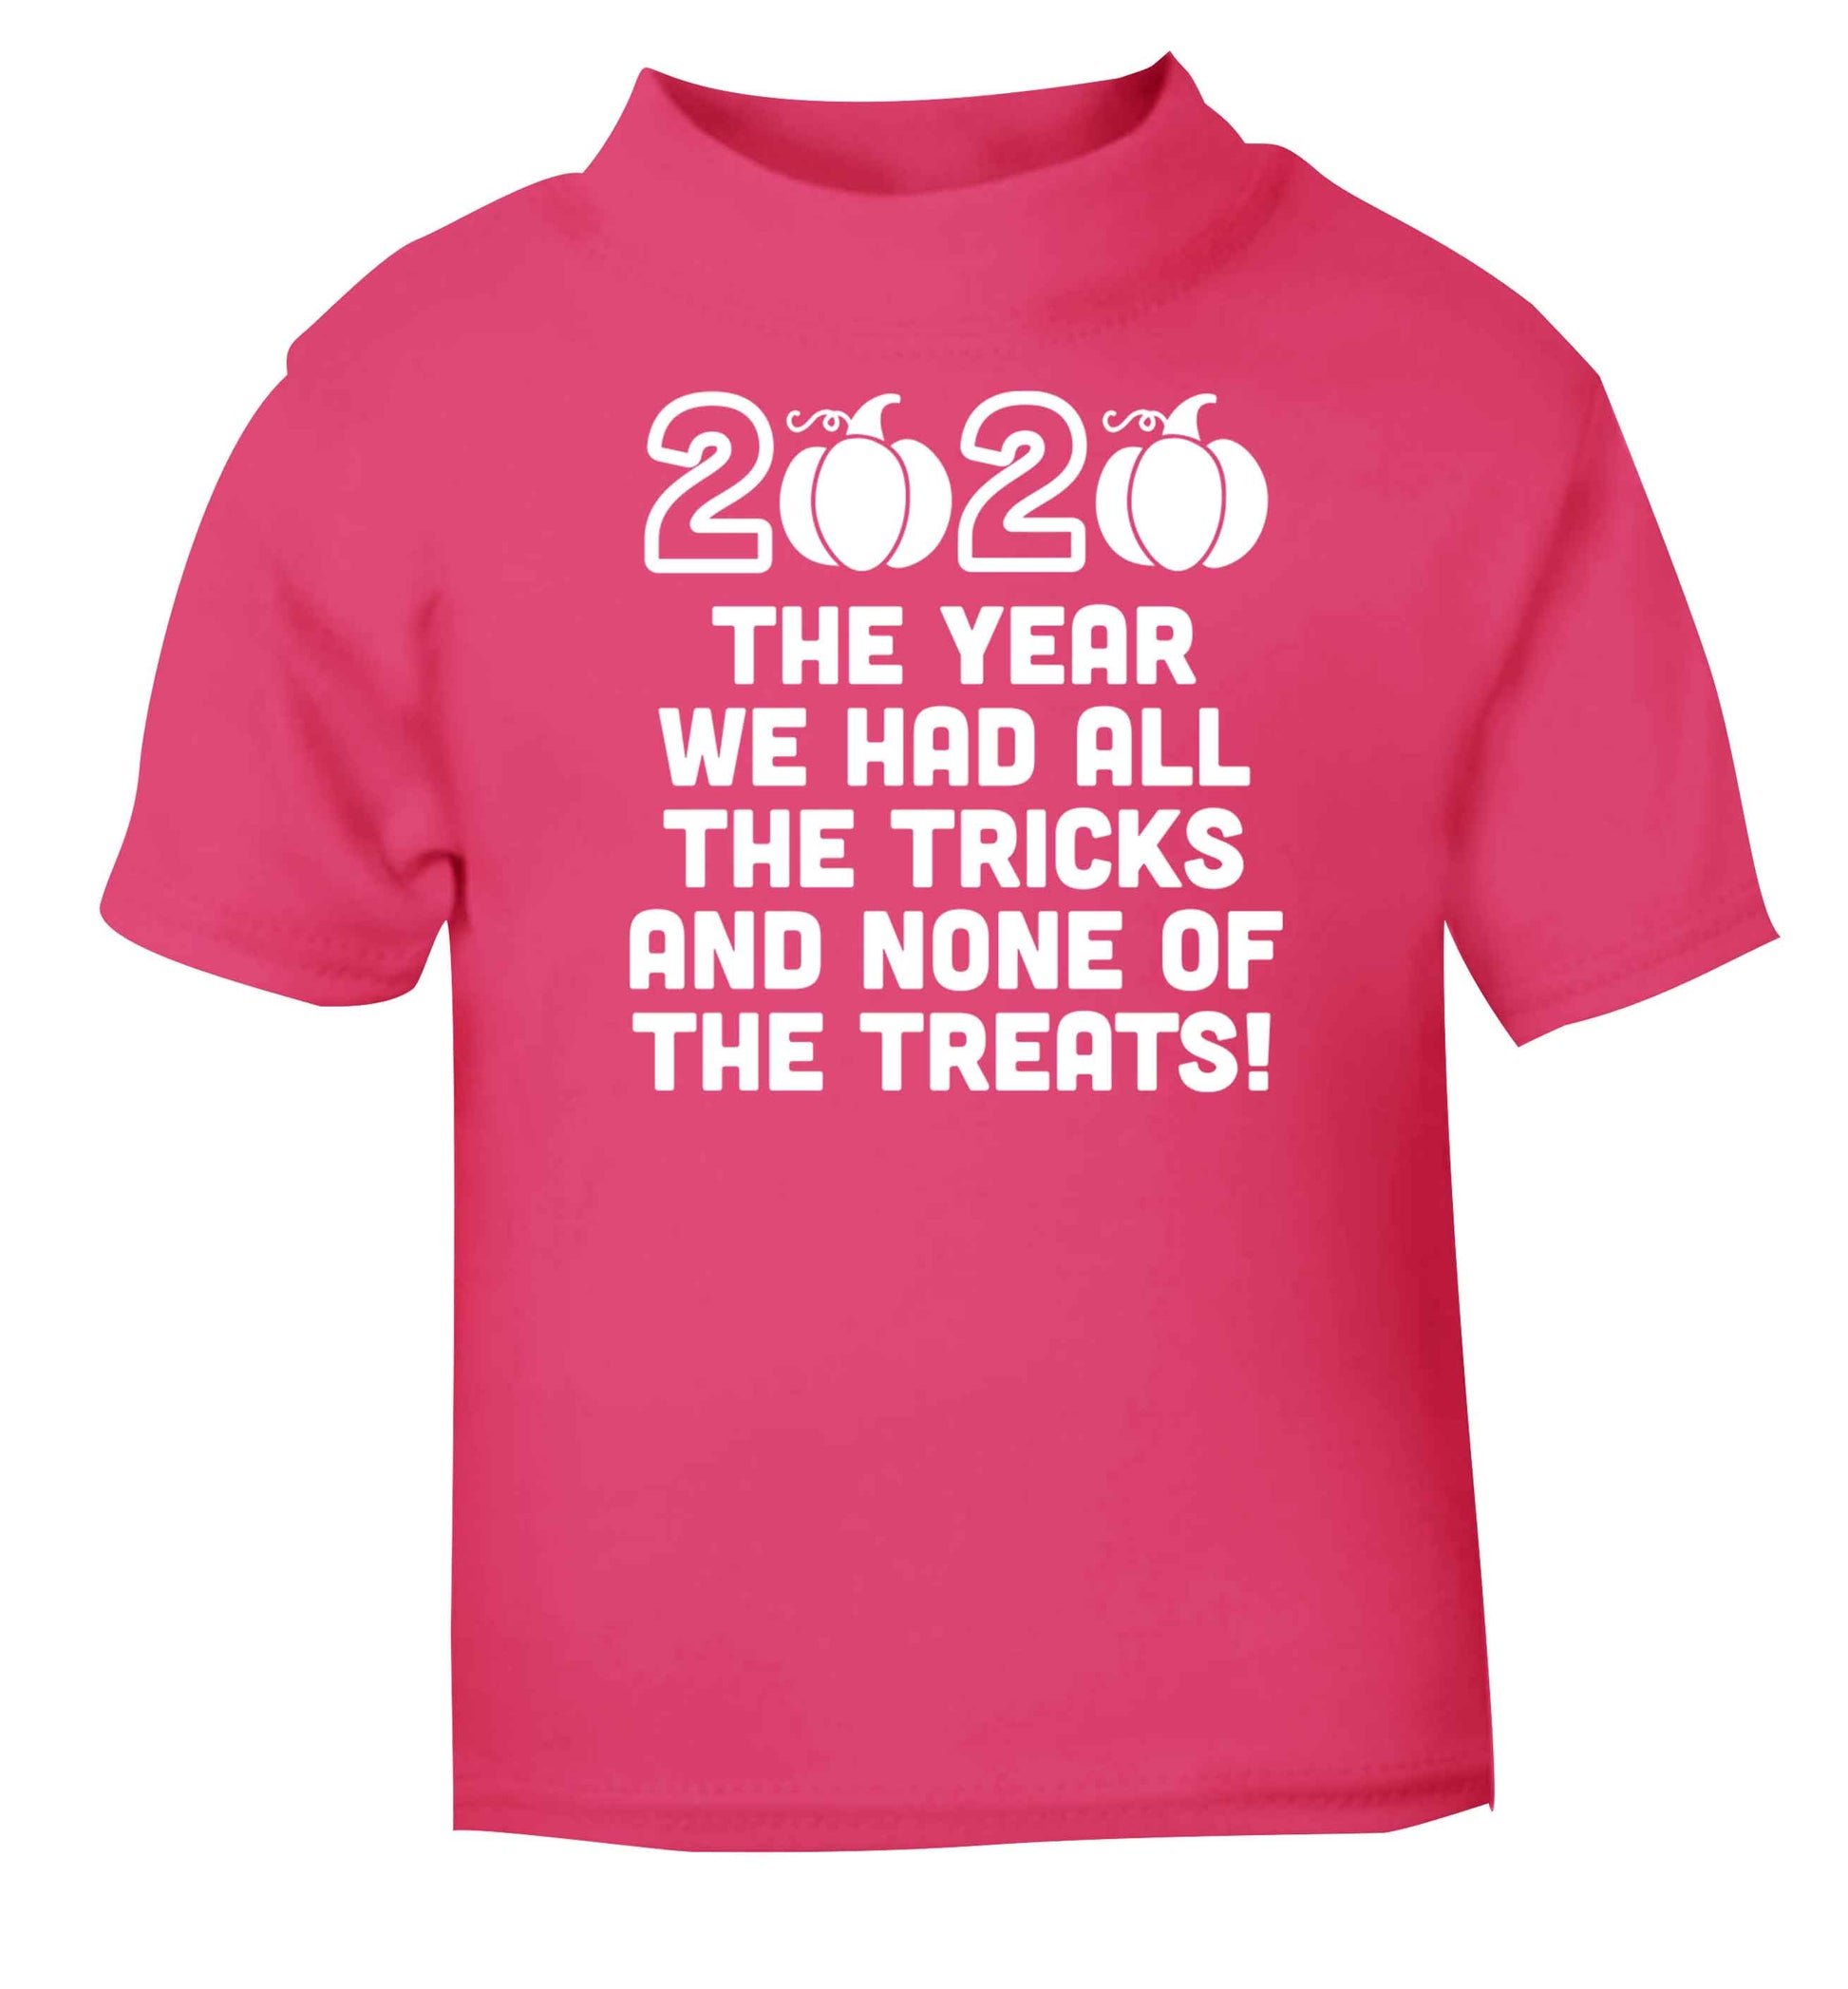 2020 The year we had all of the tricks and none of the treats pink baby toddler Tshirt 2 Years